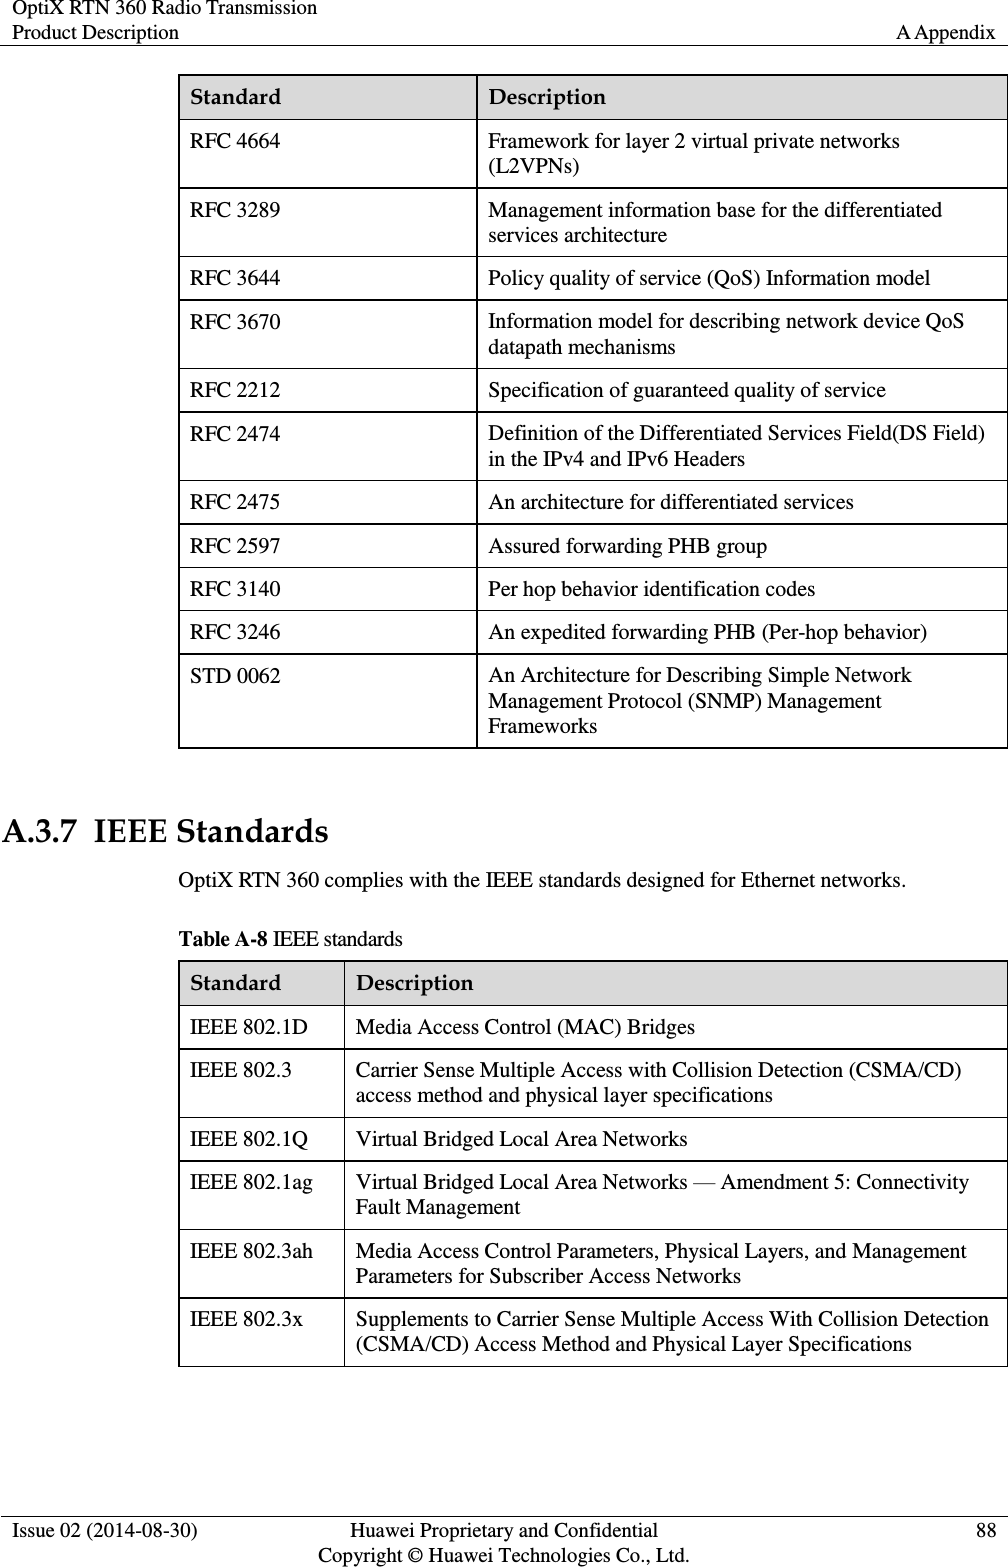 OptiX RTN 360 Radio Transmission Product Description A Appendix  Issue 02 (2014-08-30) Huawei Proprietary and Confidential                                     Copyright © Huawei Technologies Co., Ltd. 88  Standard Description RFC 4664 Framework for layer 2 virtual private networks (L2VPNs) RFC 3289 Management information base for the differentiated services architecture RFC 3644 Policy quality of service (QoS) Information model RFC 3670   Information model for describing network device QoS datapath mechanisms RFC 2212 Specification of guaranteed quality of service RFC 2474 Definition of the Differentiated Services Field(DS Field) in the IPv4 and IPv6 Headers RFC 2475 An architecture for differentiated services RFC 2597 Assured forwarding PHB group RFC 3140 Per hop behavior identification codes RFC 3246 An expedited forwarding PHB (Per-hop behavior) STD 0062 An Architecture for Describing Simple Network Management Protocol (SNMP) Management Frameworks  A.3.7  IEEE Standards OptiX RTN 360 complies with the IEEE standards designed for Ethernet networks. Table A-8 IEEE standards Standard Description IEEE 802.1D Media Access Control (MAC) Bridges IEEE 802.3 Carrier Sense Multiple Access with Collision Detection (CSMA/CD) access method and physical layer specifications IEEE 802.1Q Virtual Bridged Local Area Networks IEEE 802.1ag Virtual Bridged Local Area Networks — Amendment 5: Connectivity Fault Management IEEE 802.3ah Media Access Control Parameters, Physical Layers, and Management Parameters for Subscriber Access Networks IEEE 802.3x Supplements to Carrier Sense Multiple Access With Collision Detection (CSMA/CD) Access Method and Physical Layer Specifications  